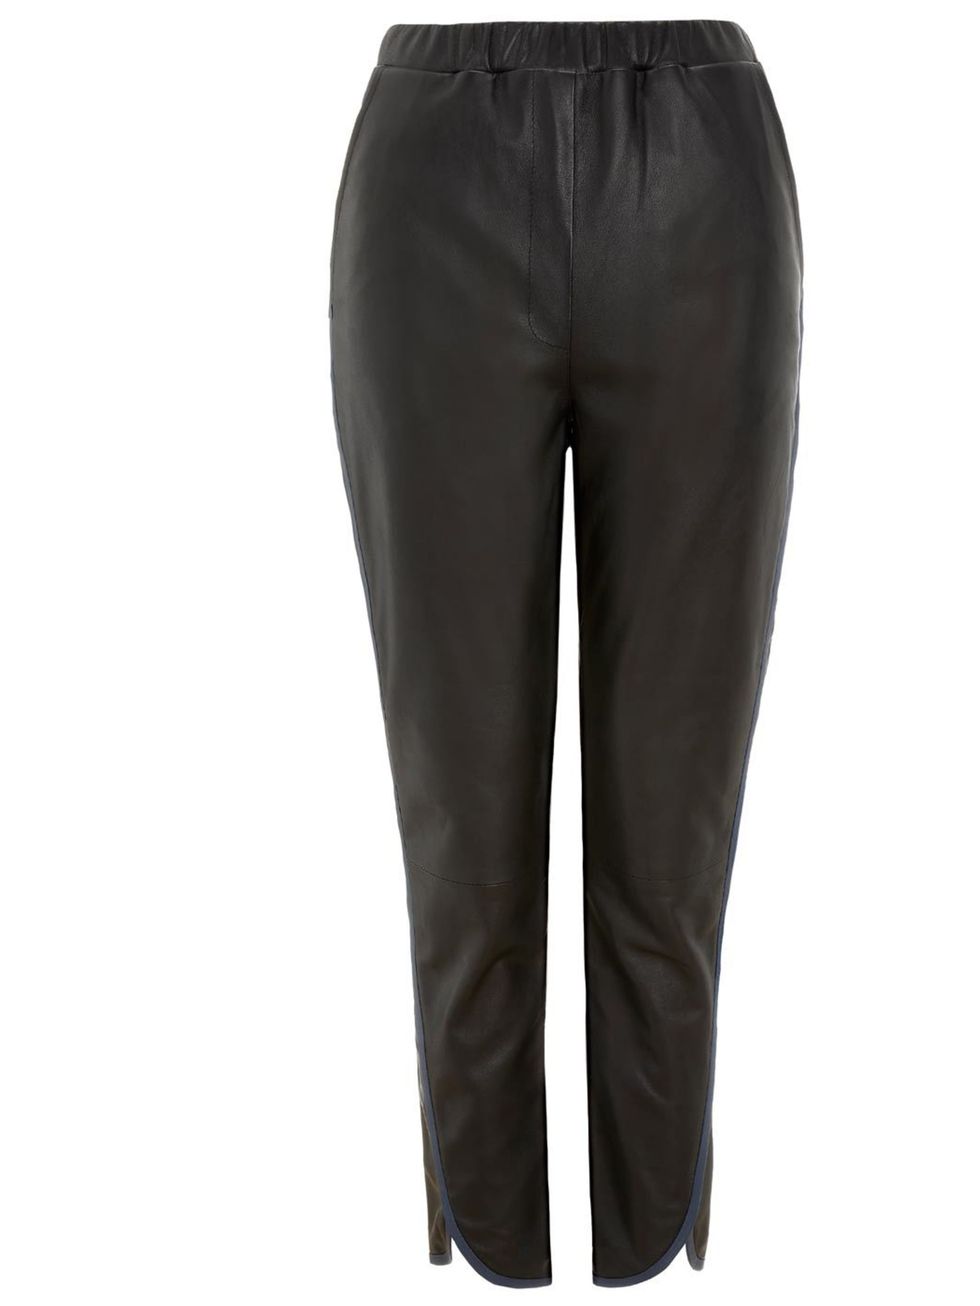 <p>Whistles leather trousers, £350</p><p><a href="http://shopping.elleuk.com/browse?fts=whistles+contrast+pipe+leather+trousers">BUY NOW</a></p>